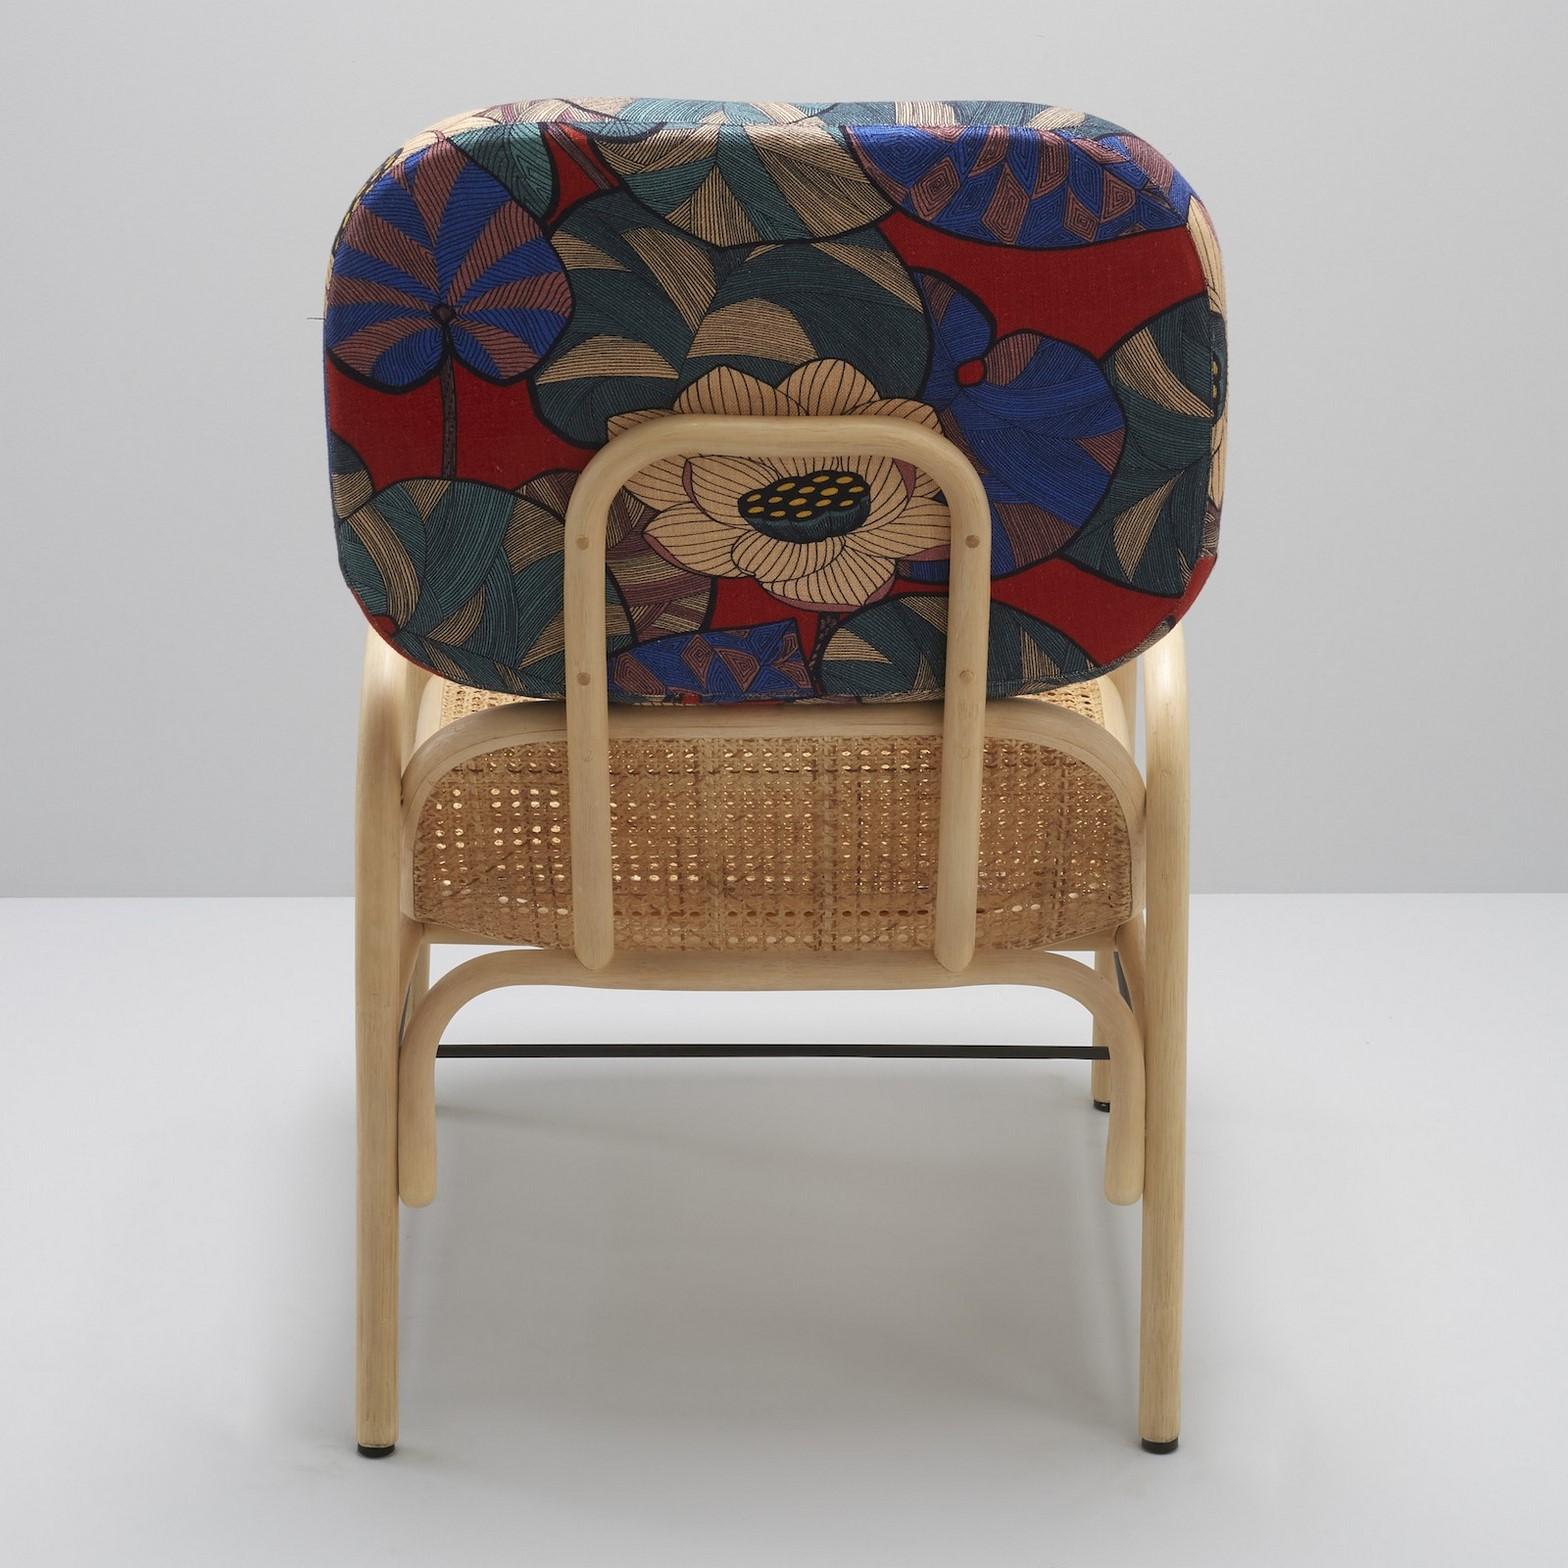 Combining modernity and tradition, design, graphic lines and timelessness this lounger chair is composed of a robust curved rattan and airy structure, a cane seat and a soft fabric adorning the comfy headrest.